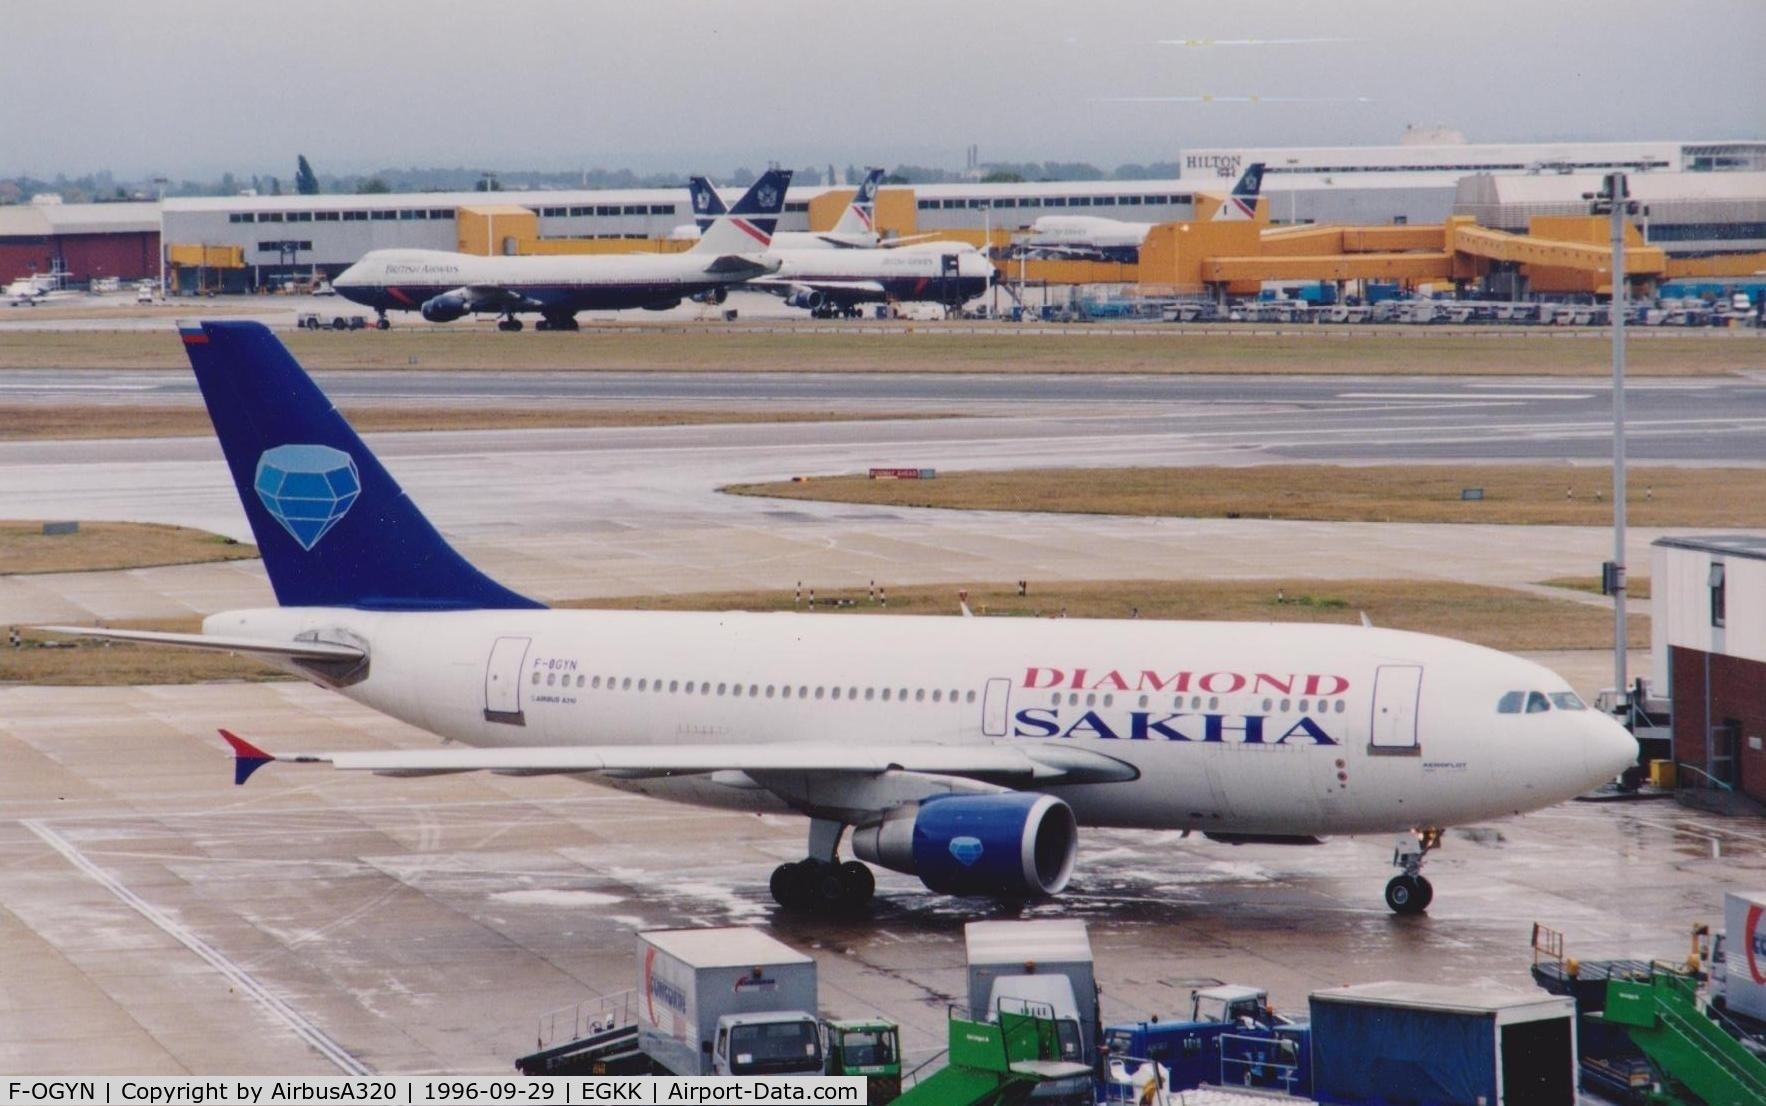 F-OGYN, 1988 Airbus A310-324 C/N 458, seen at LHR operating for Aeroflot